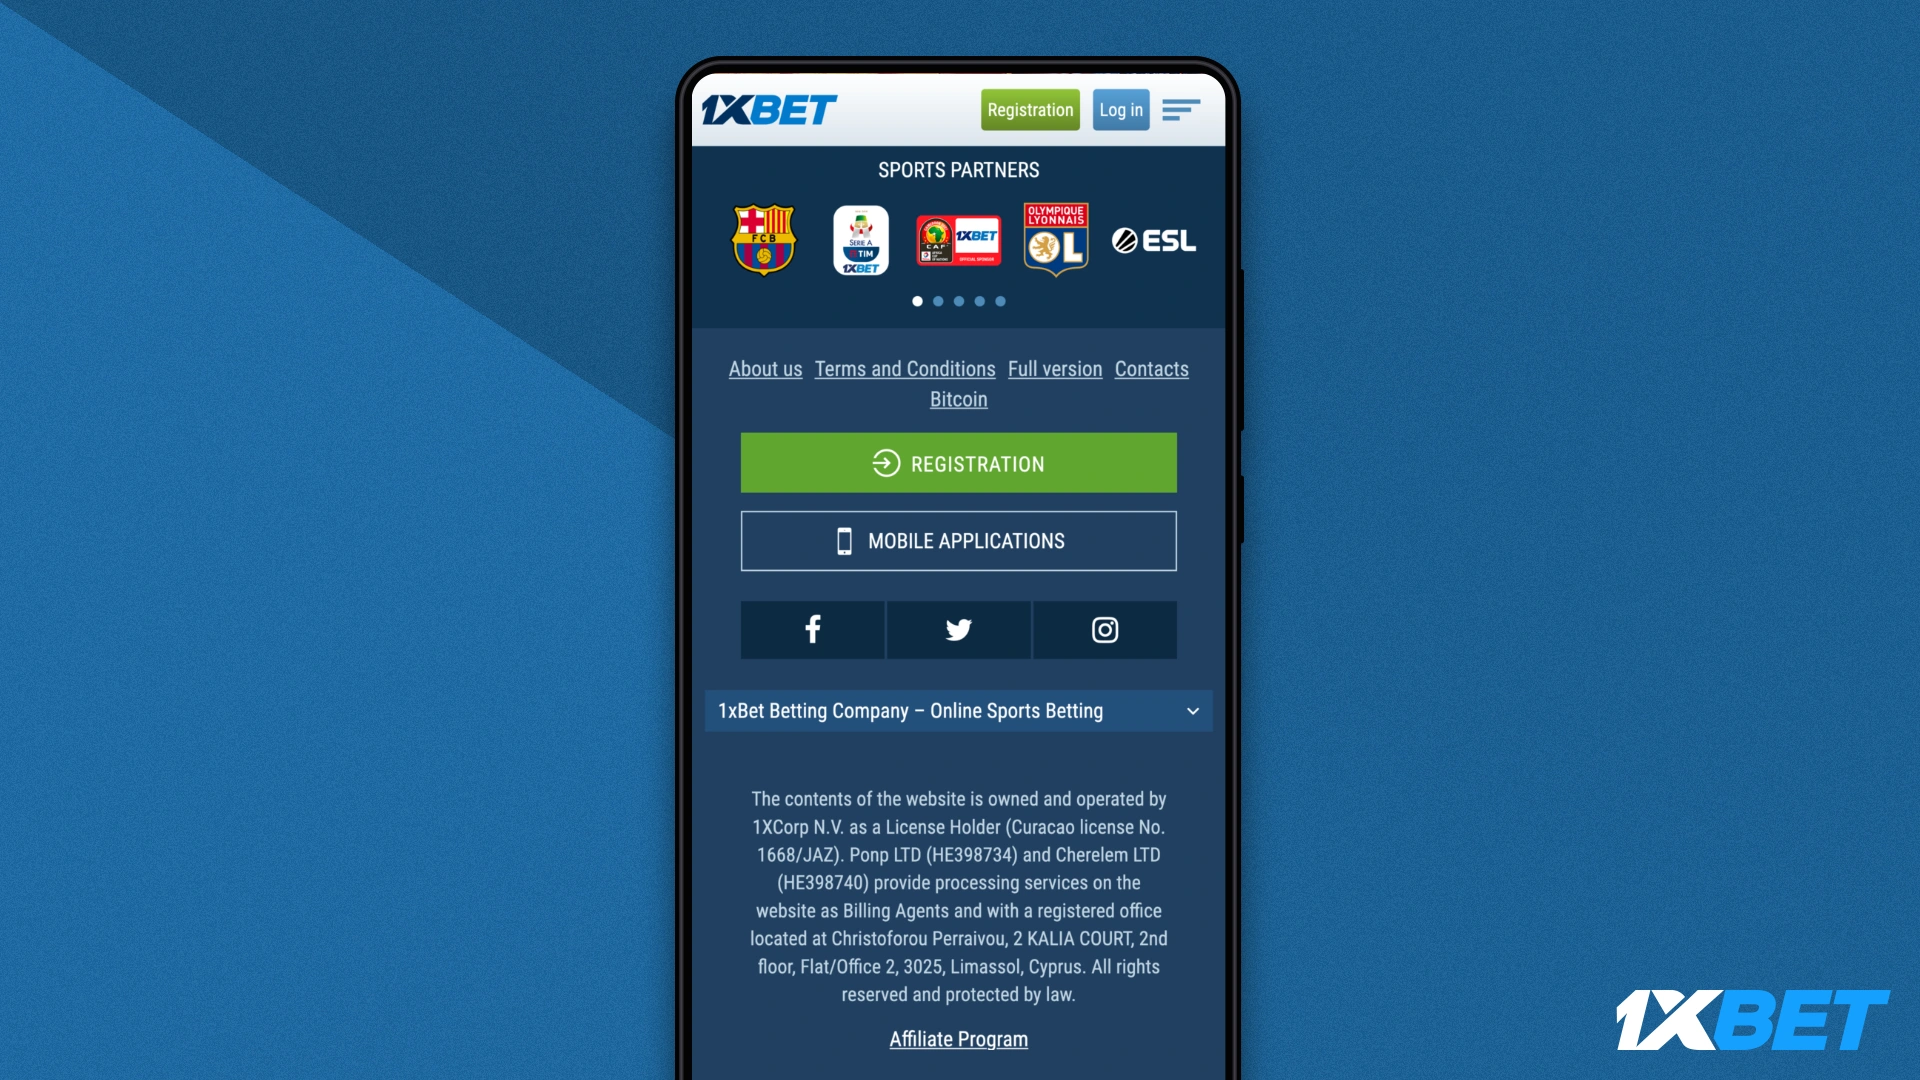 To download the 1xBet app for Android, you need to go to a special page on the official website of the bookmaker company